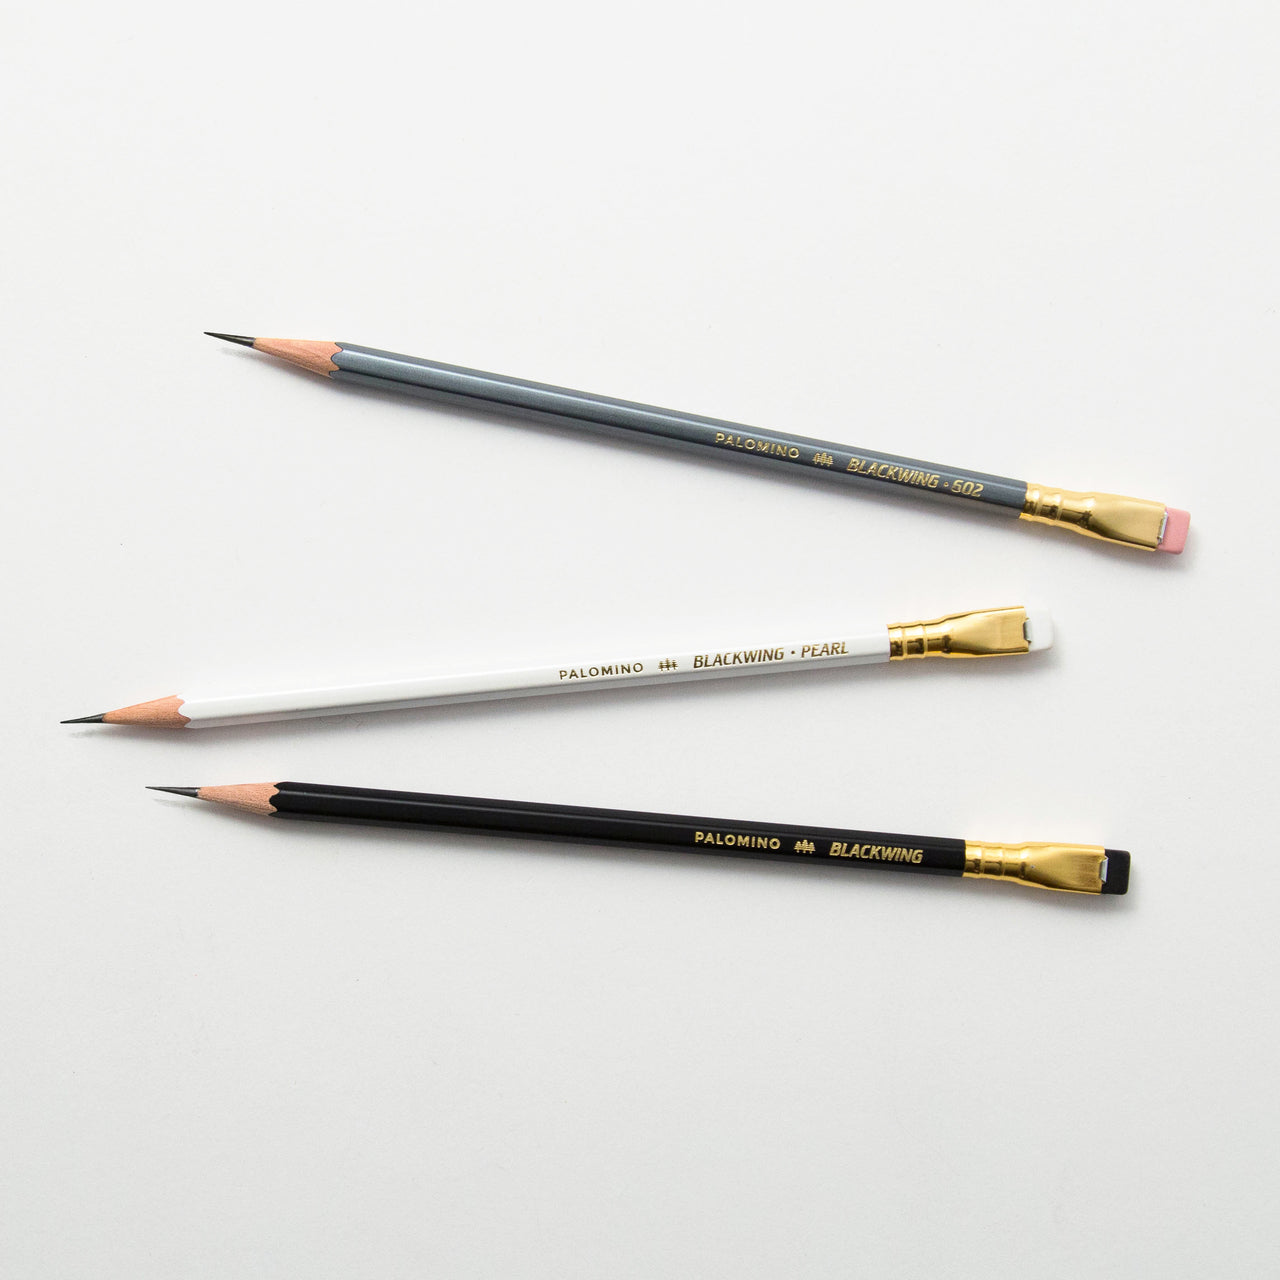 The Blackwing "core" pencils- 602, pearl, matte